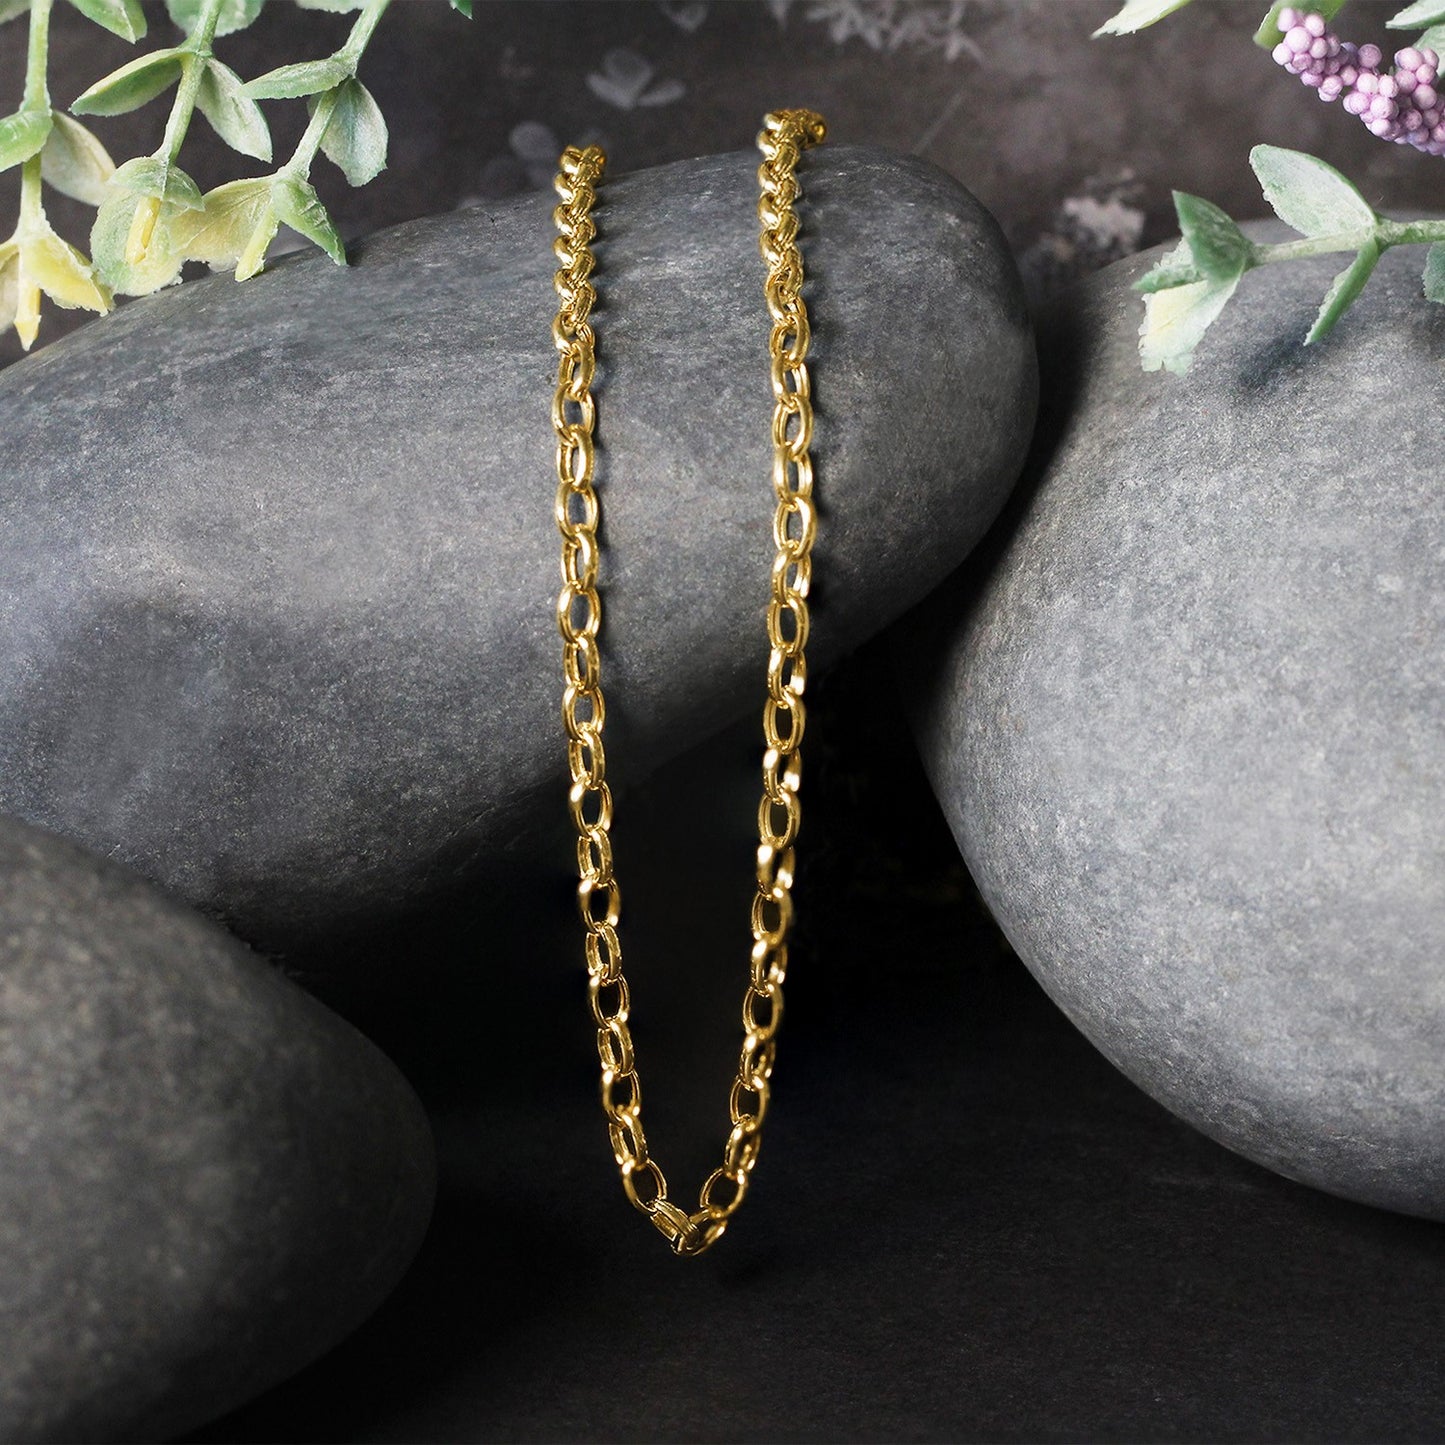 3.2mm 14k Yellow Gold Oval Rolo Chain